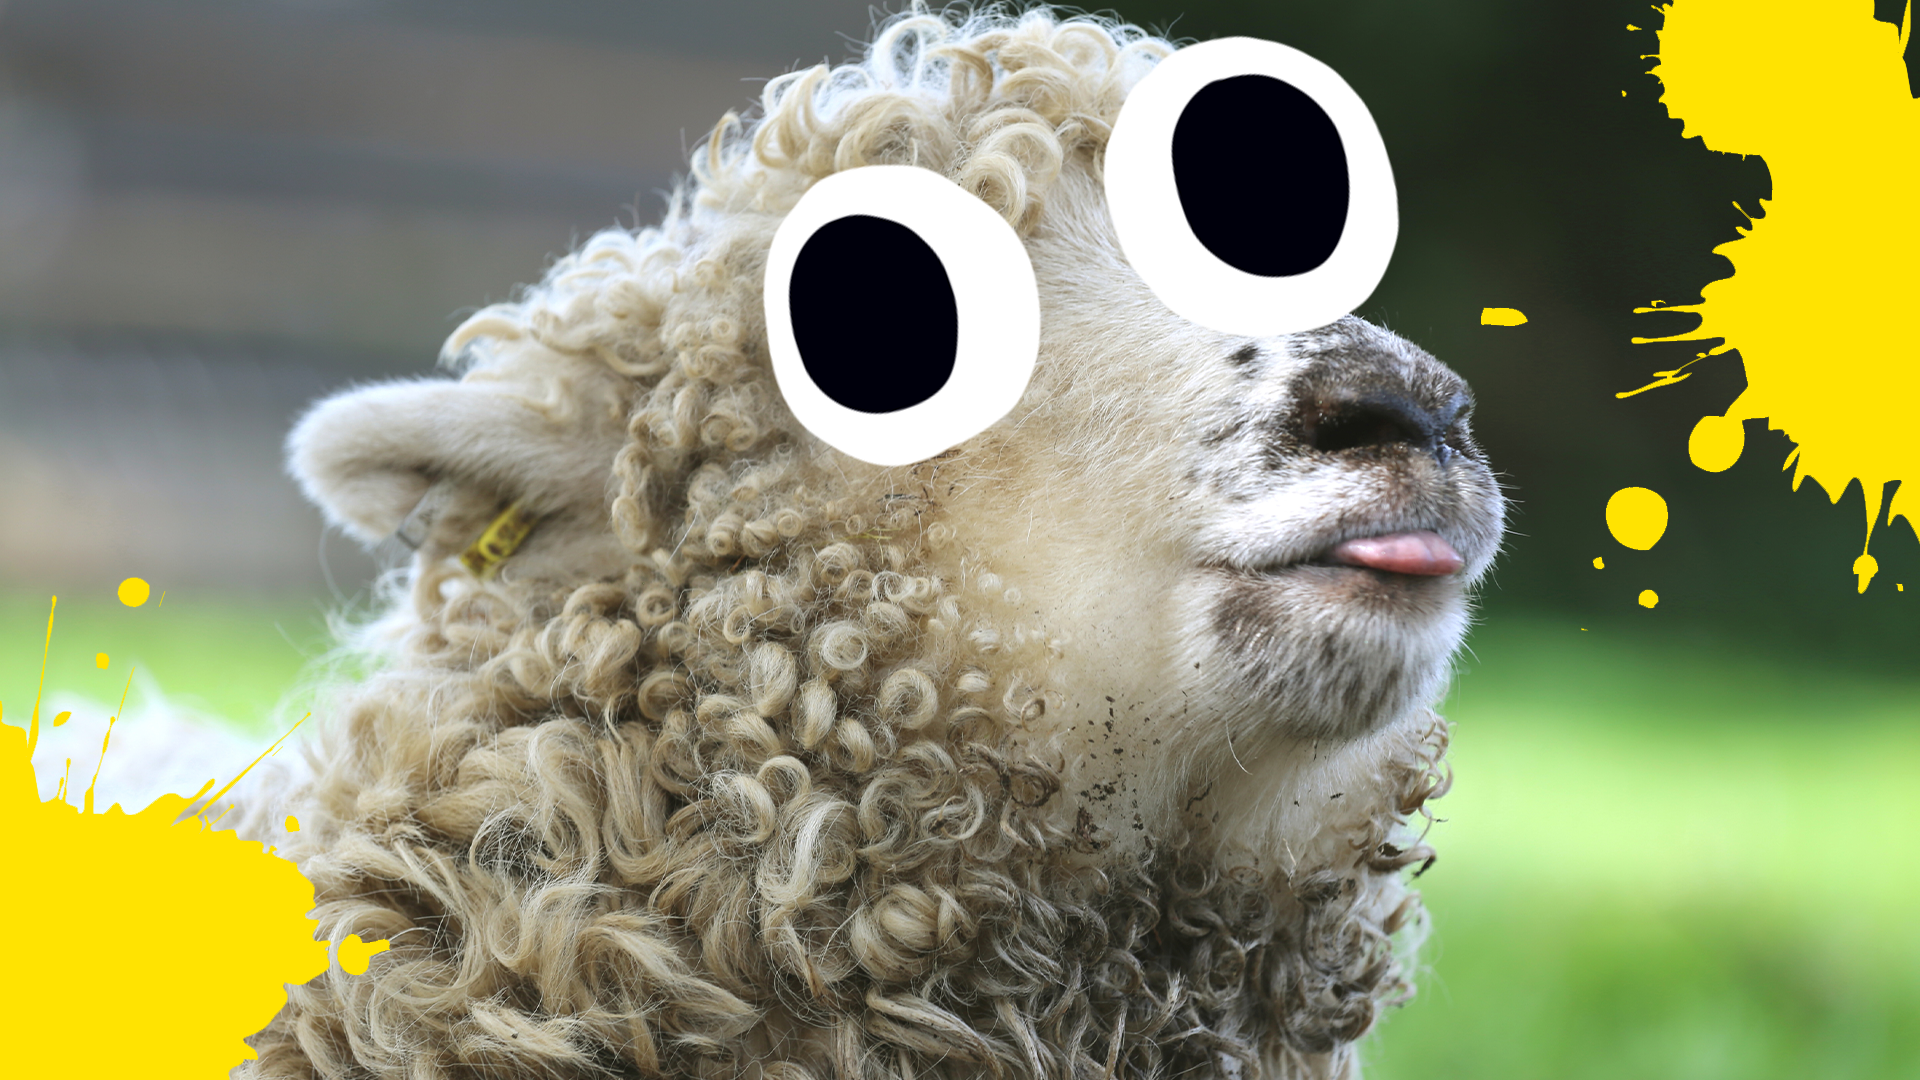 Silly sheep and yellow splats